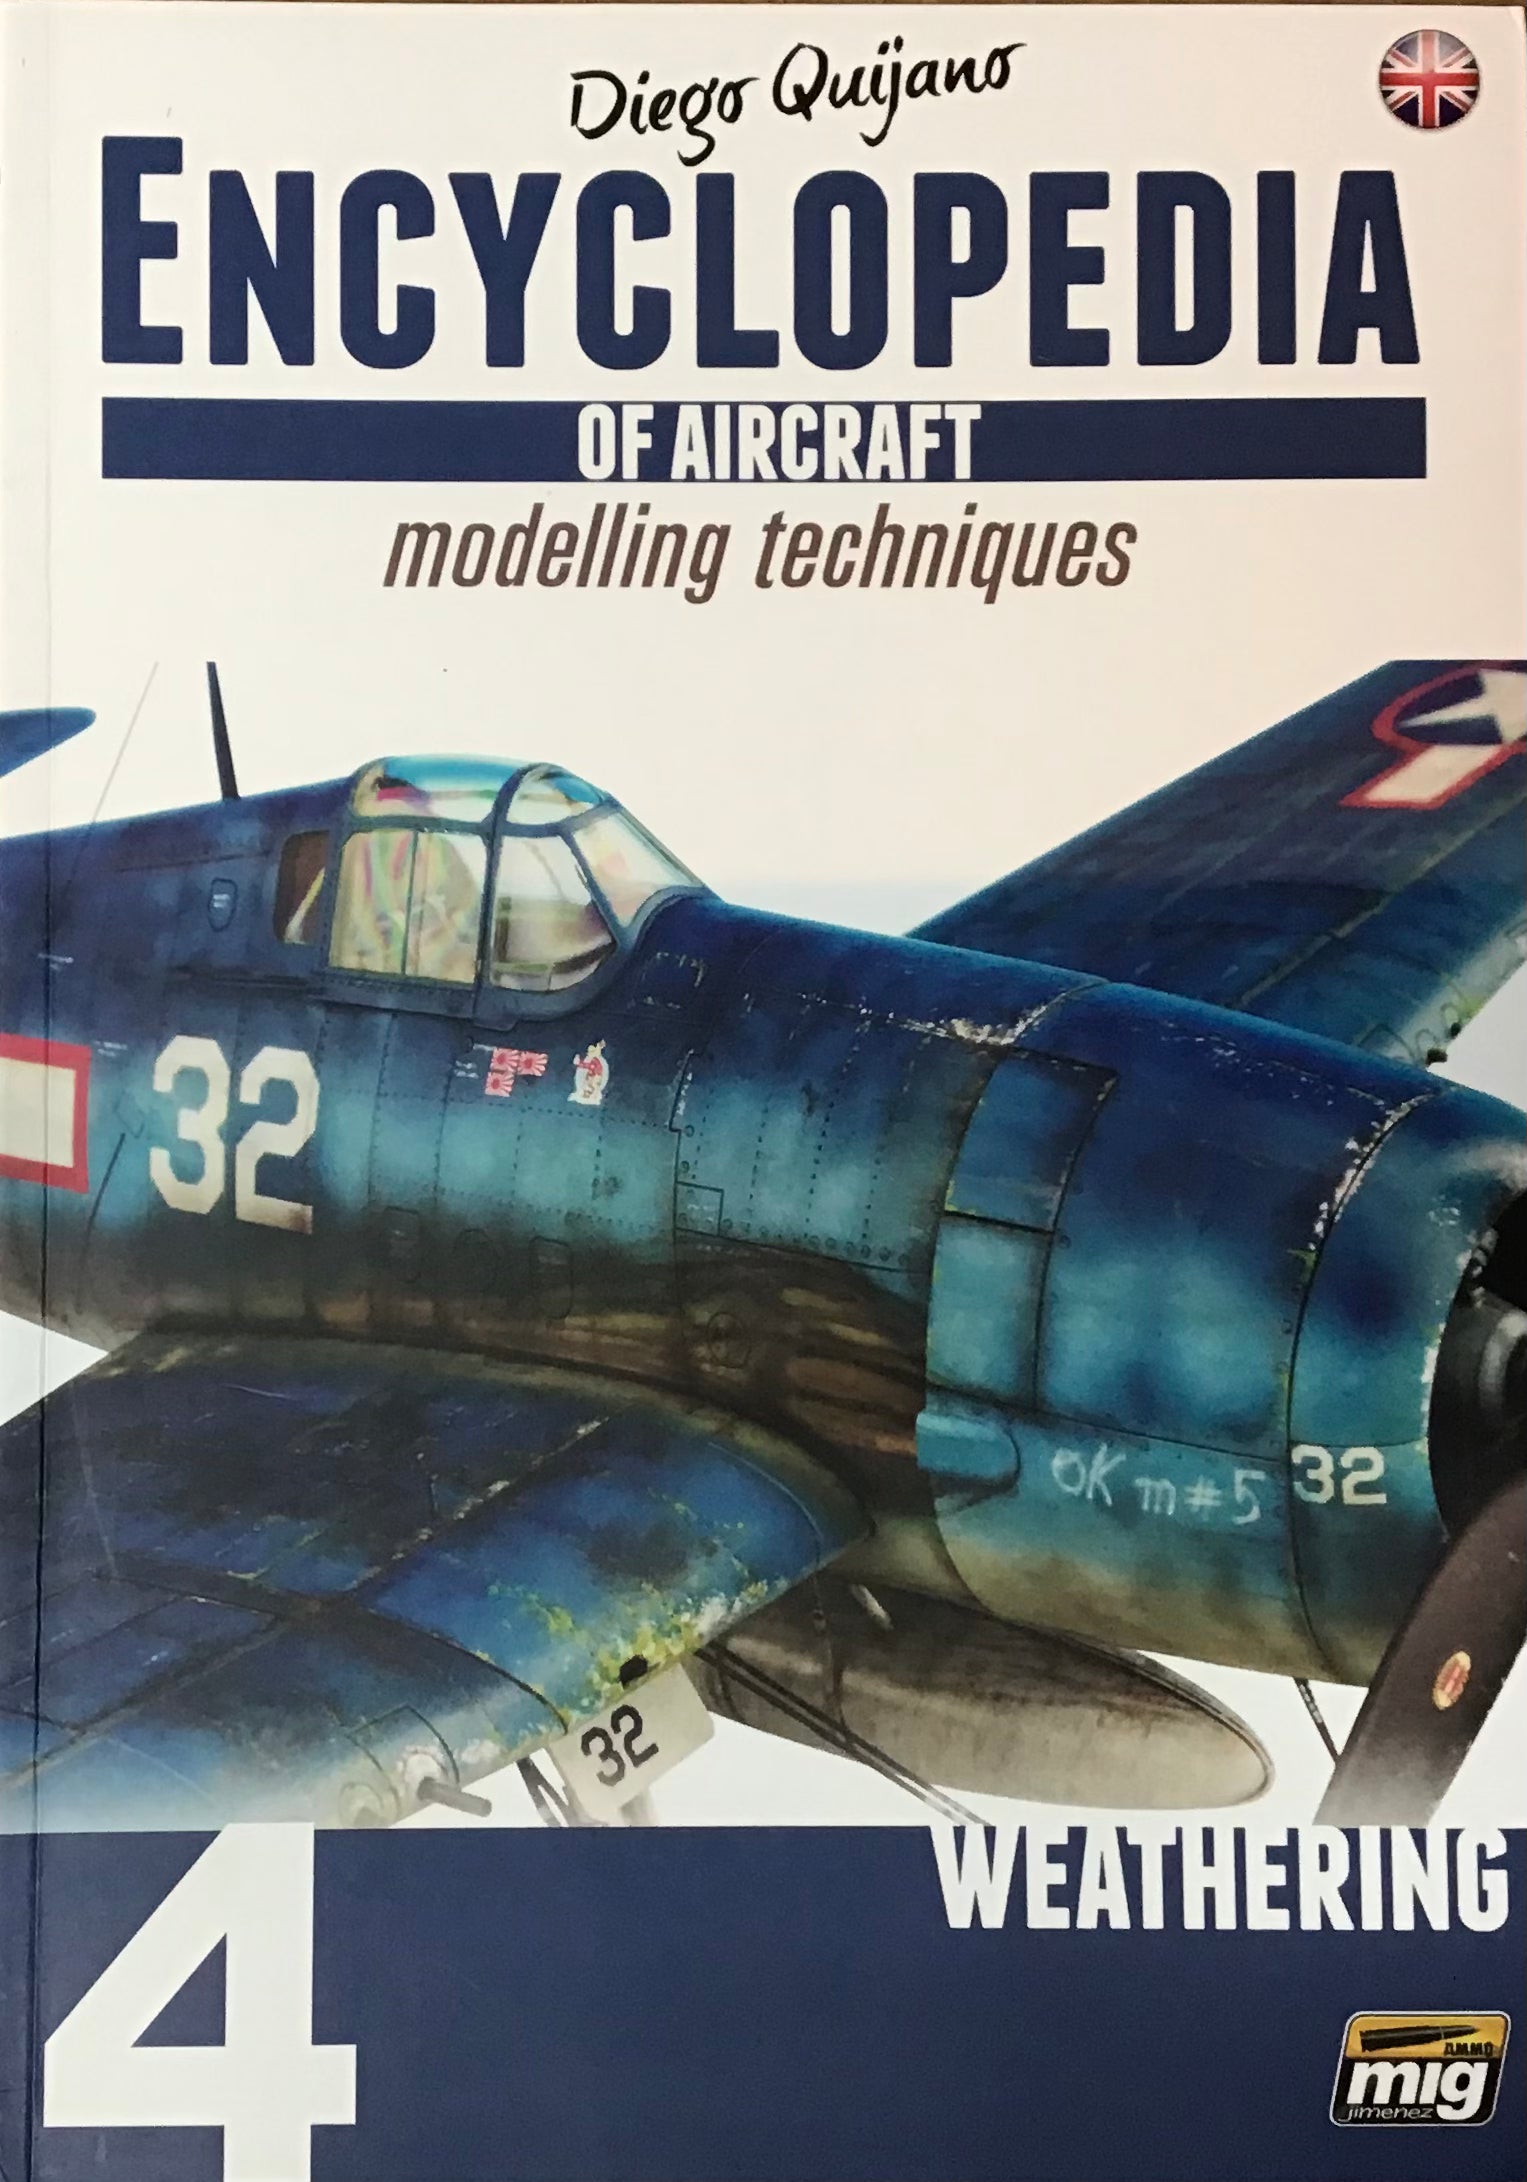 Encyclopedia of Aircraft 4: Modelling Techniques Weathering by Diego Quijano - Chester Model Centre